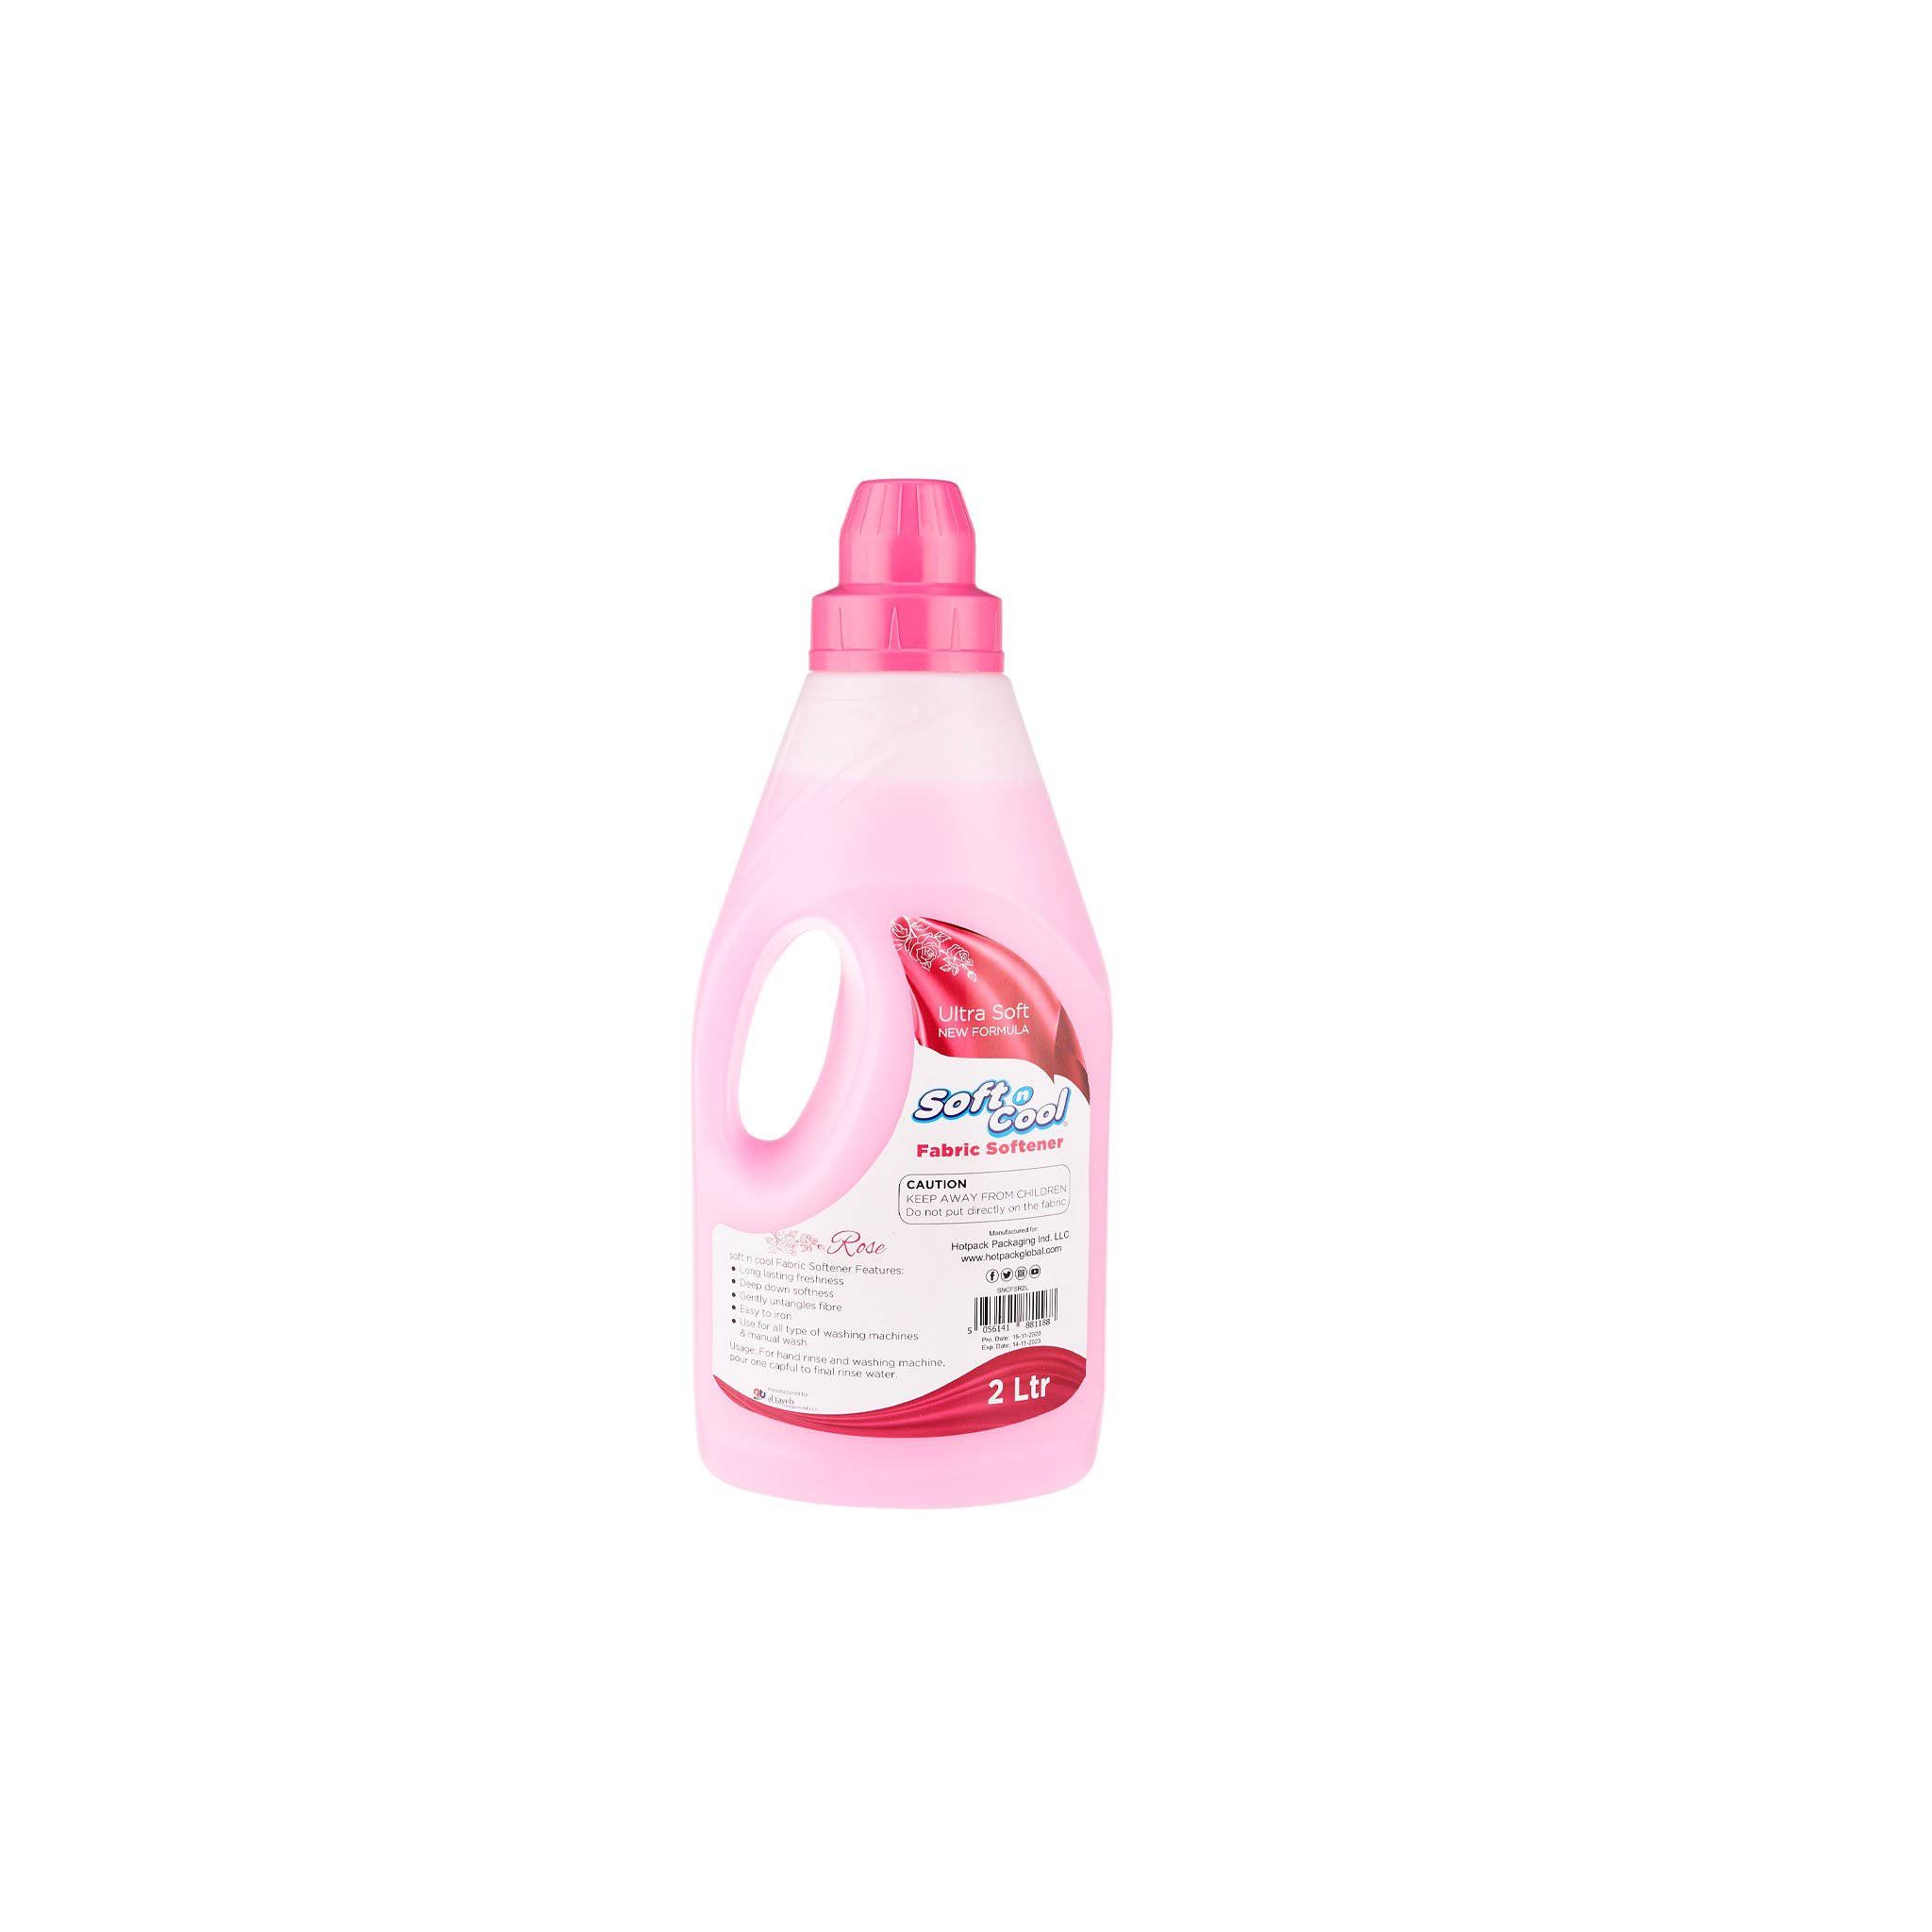 6 Pieces Soft N Cool Fabric Softner Rose 2 Liter